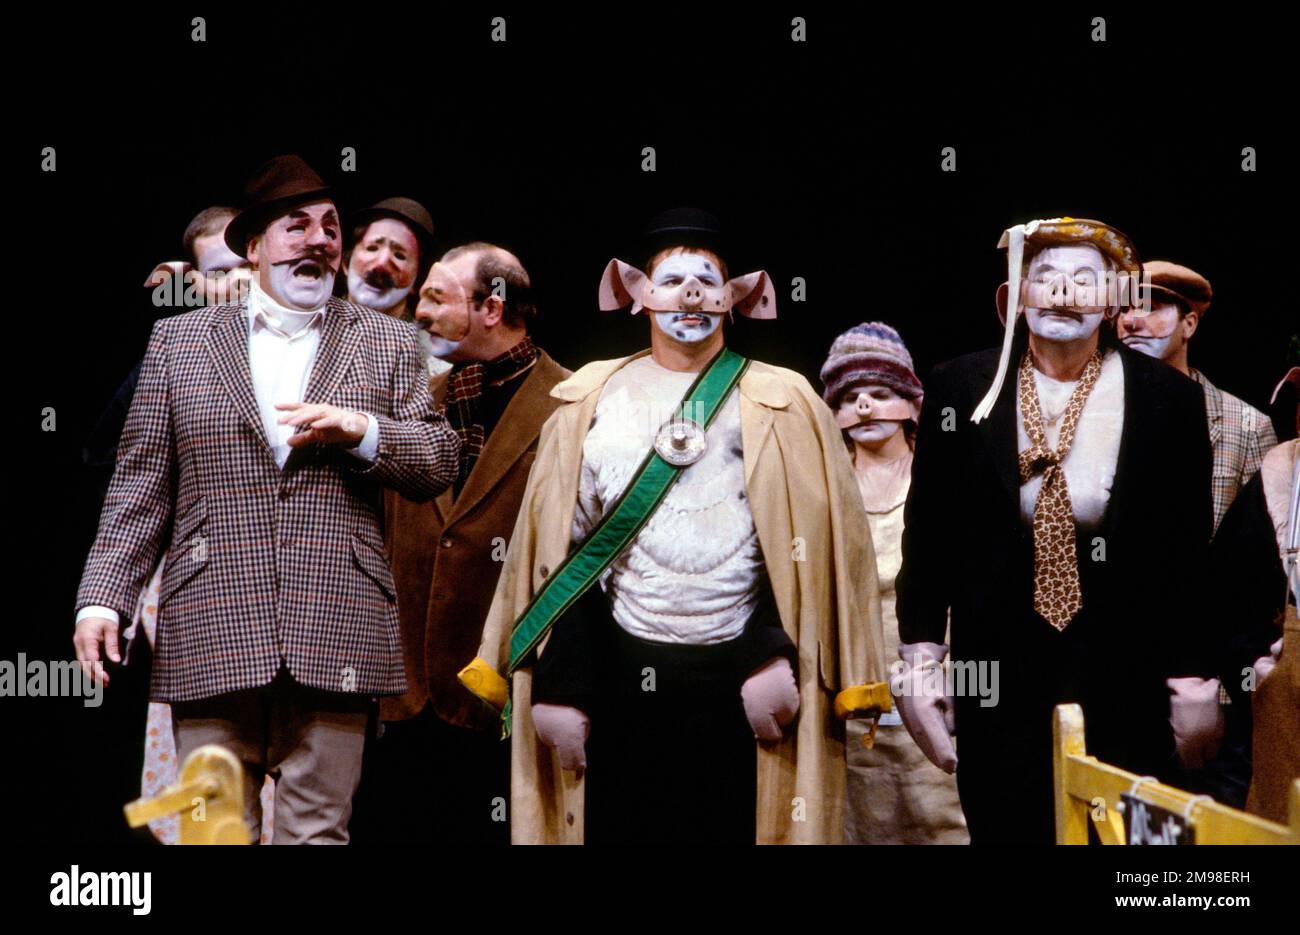 centre: Barrie Rutter (Napoleon)  right: David Ryall (Squealer) in ANIMAL FARM by George Orwell at the Olivier Theatre, National Theatre (NT), London SE1  27/09/1984  adapted & directed by Peter Hall  design: Jennifer Carey  lighting: John Bury  movement: Stuart Hopps Stock Photo